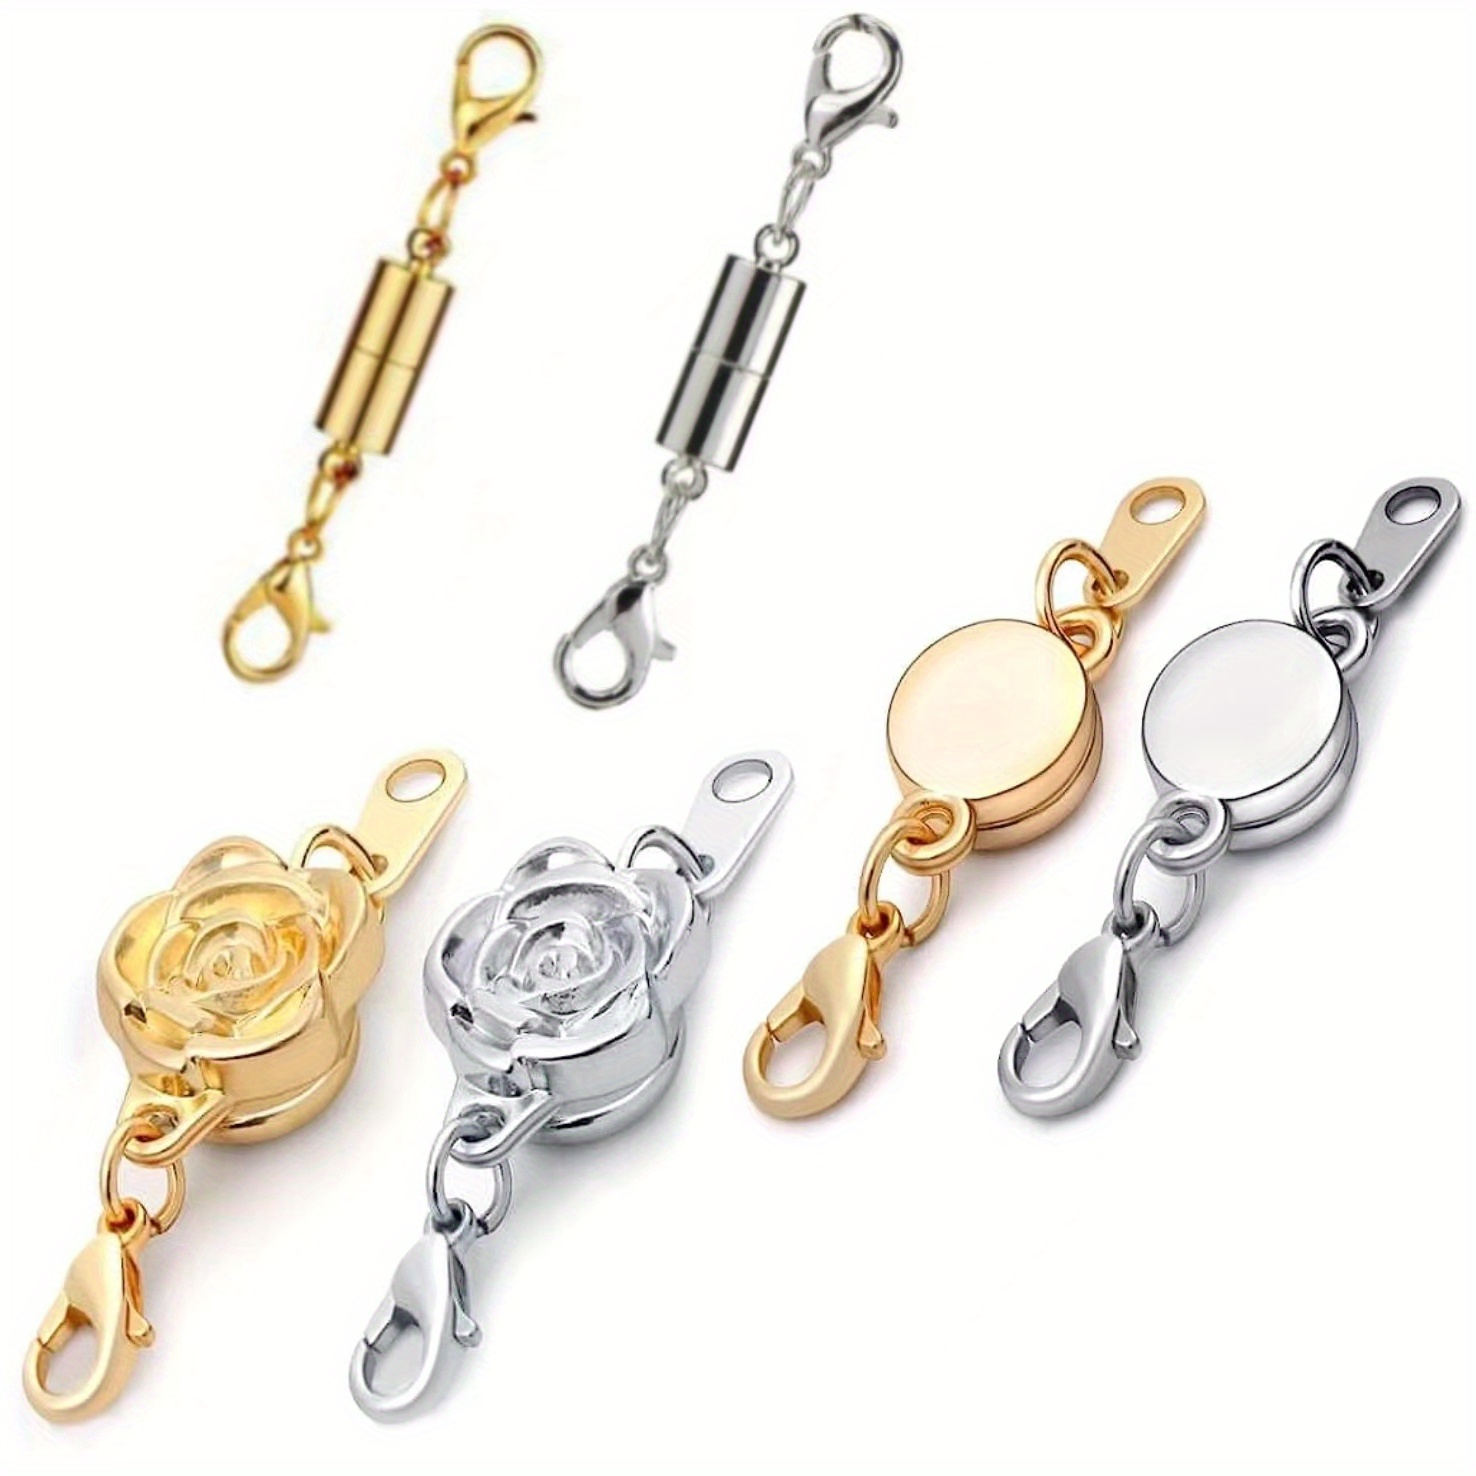 12 Pieces Magnetic Necklace Clasp Locking Magnetic Jewelry Clasp Closures  Bracelet Extender for Woman Jewelry Making Round Necklace Clasp Closures